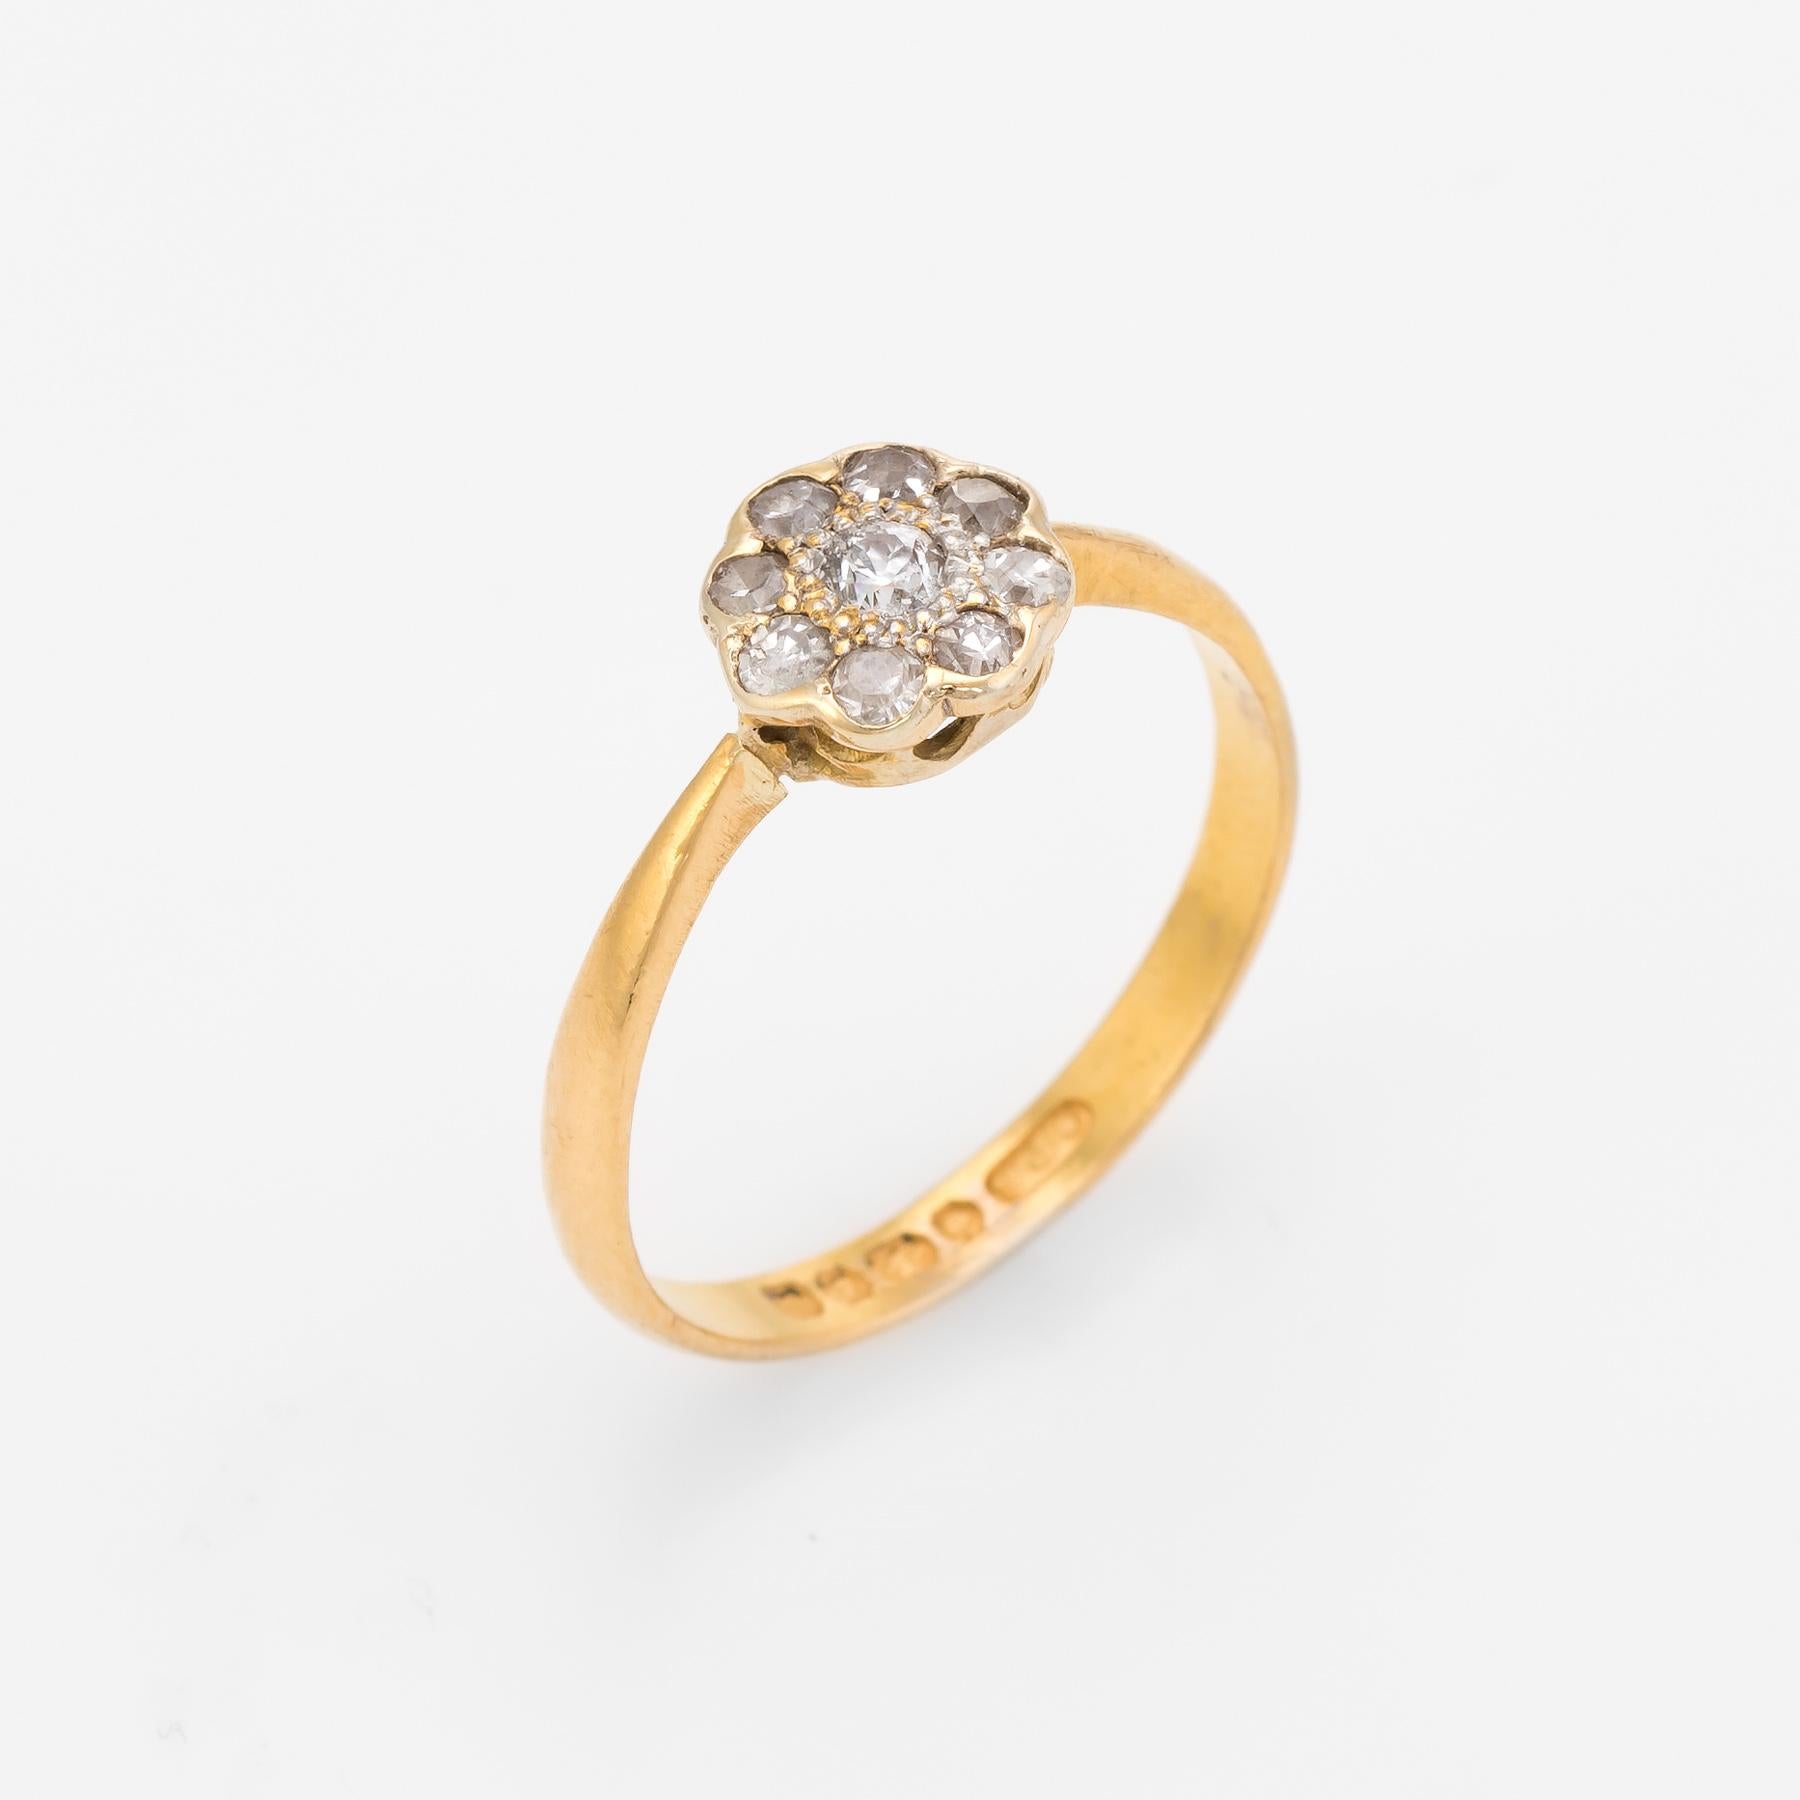 Finely detailed vintage Art Deco era ring (circa 1932), crafted in 22 karat yellow gold. 

Centrally mounted old mine cut diamond is estimated at 0.05 carats, accented with 8 estimated 0.02 carat diamonds. The total diamond weight is estimated at